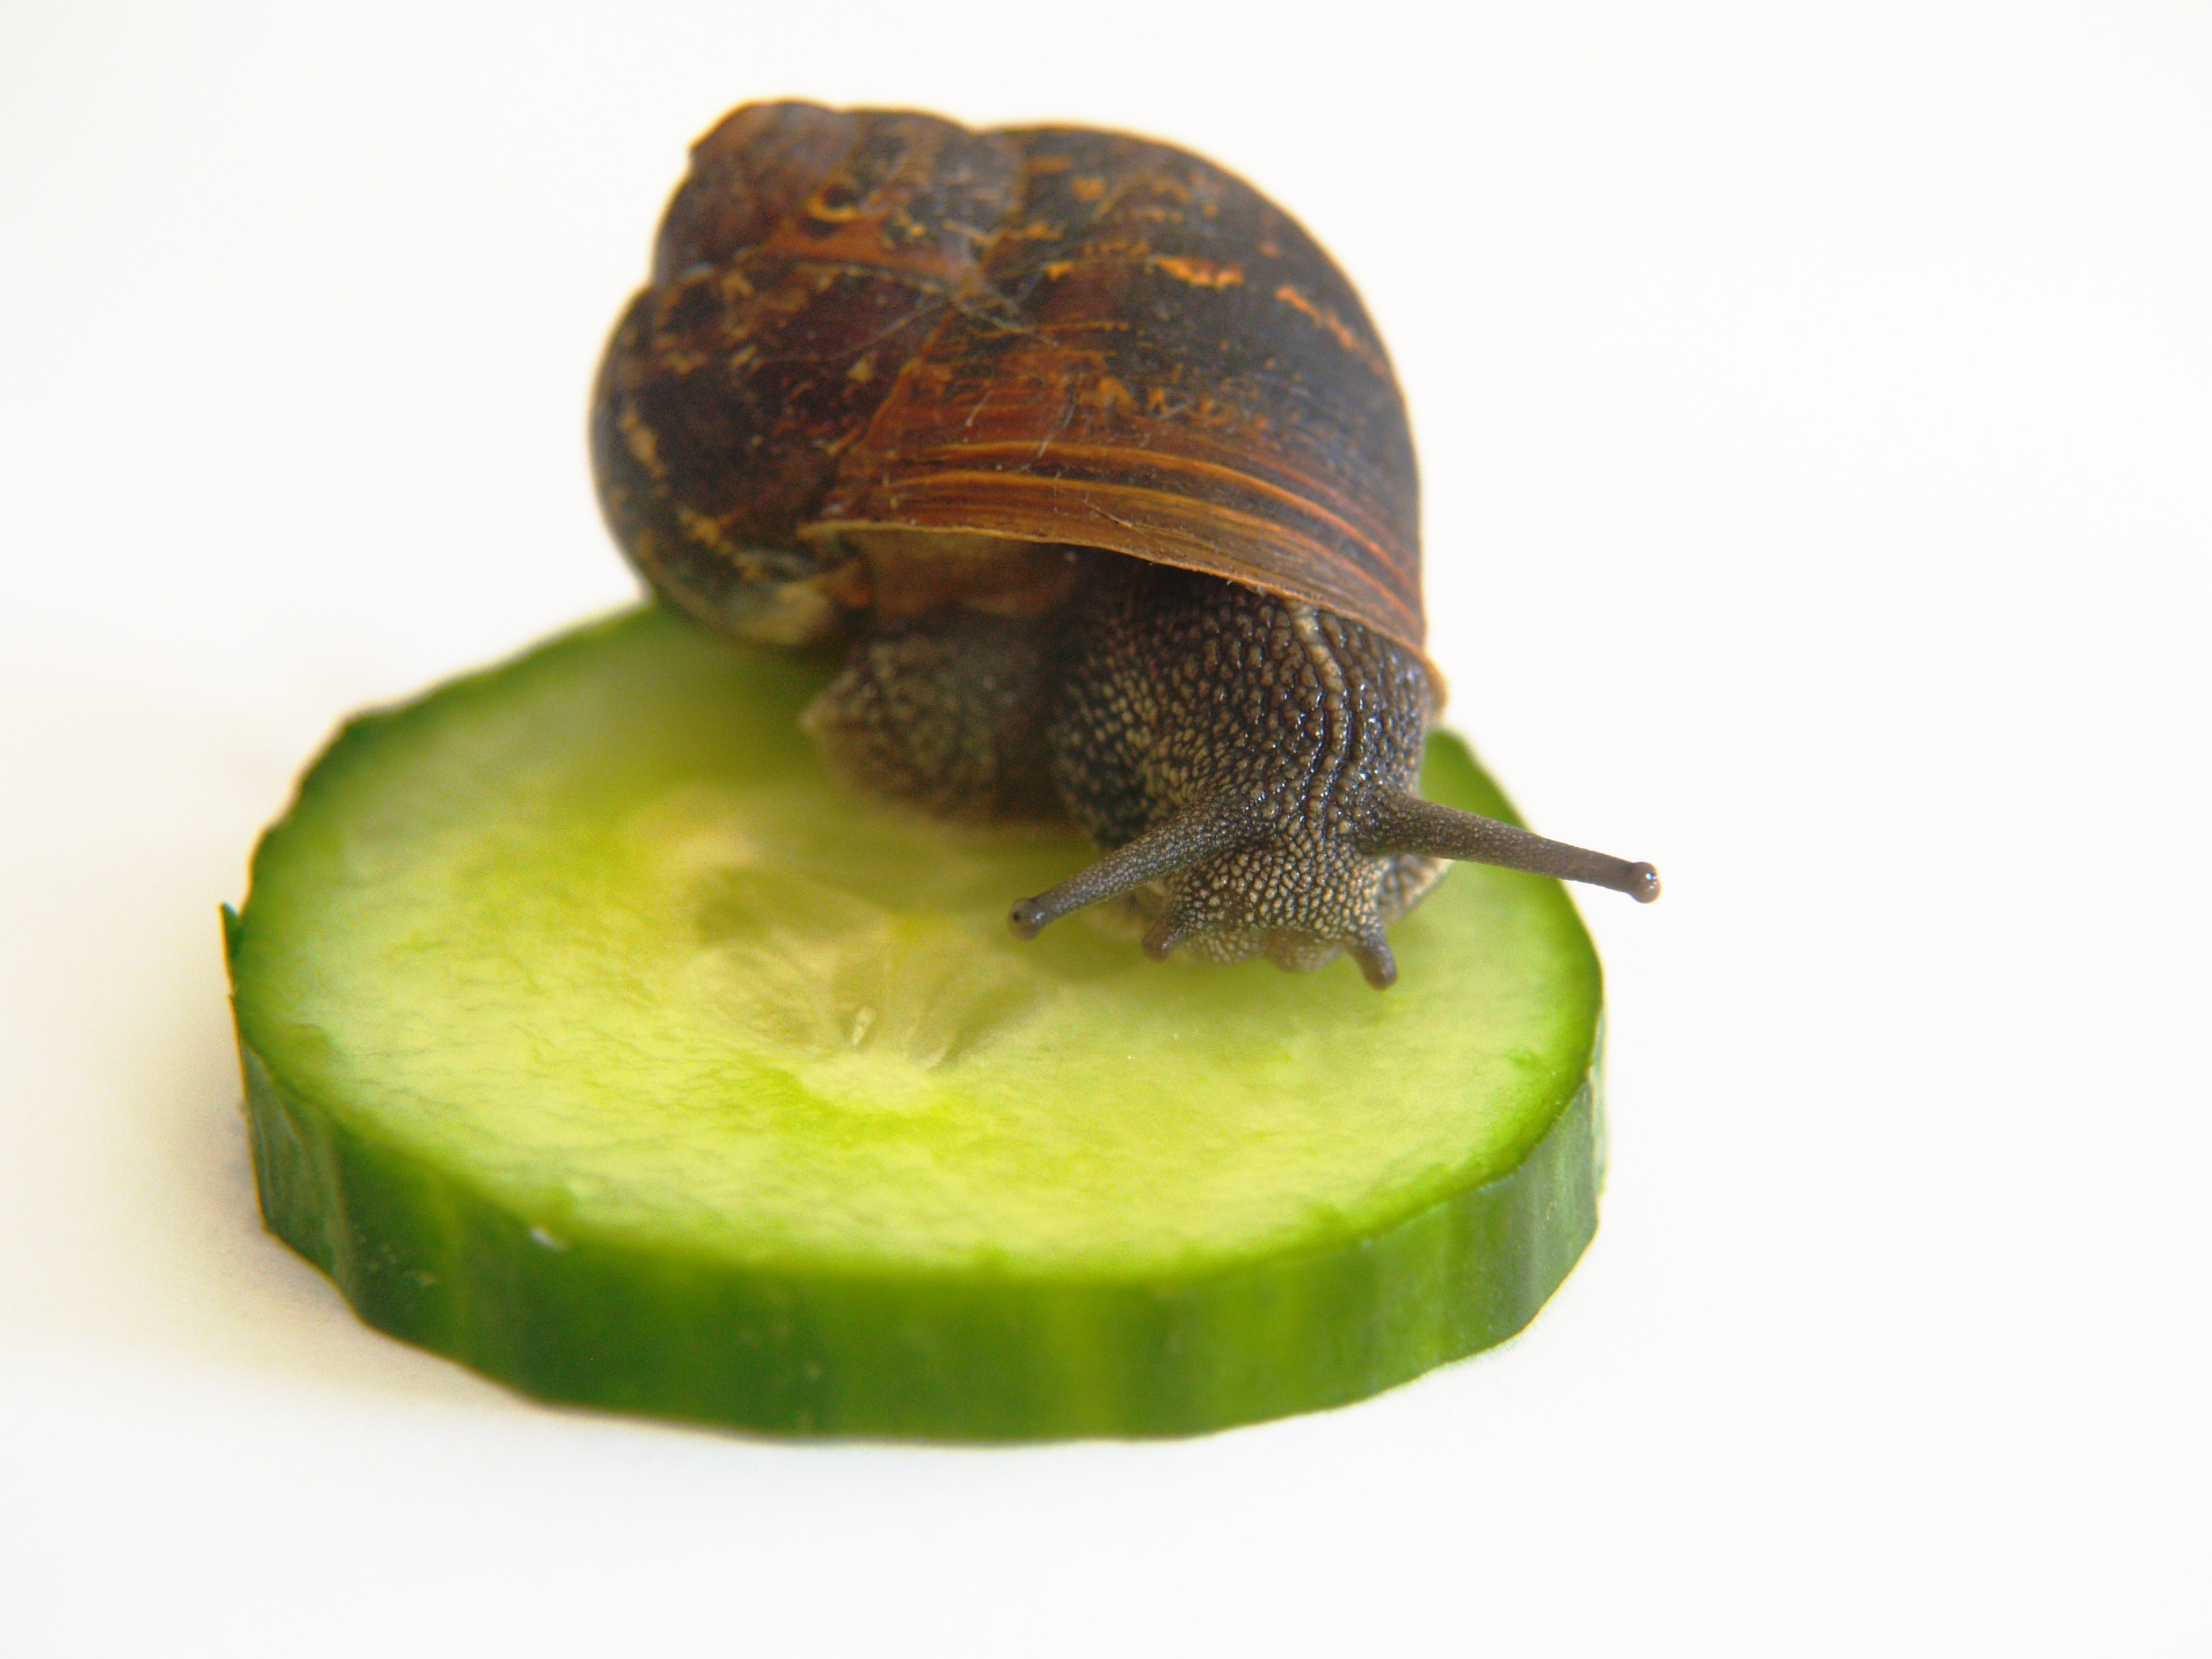 Snail, Animal, Shell, Nature, Cucumber, green color, one animal